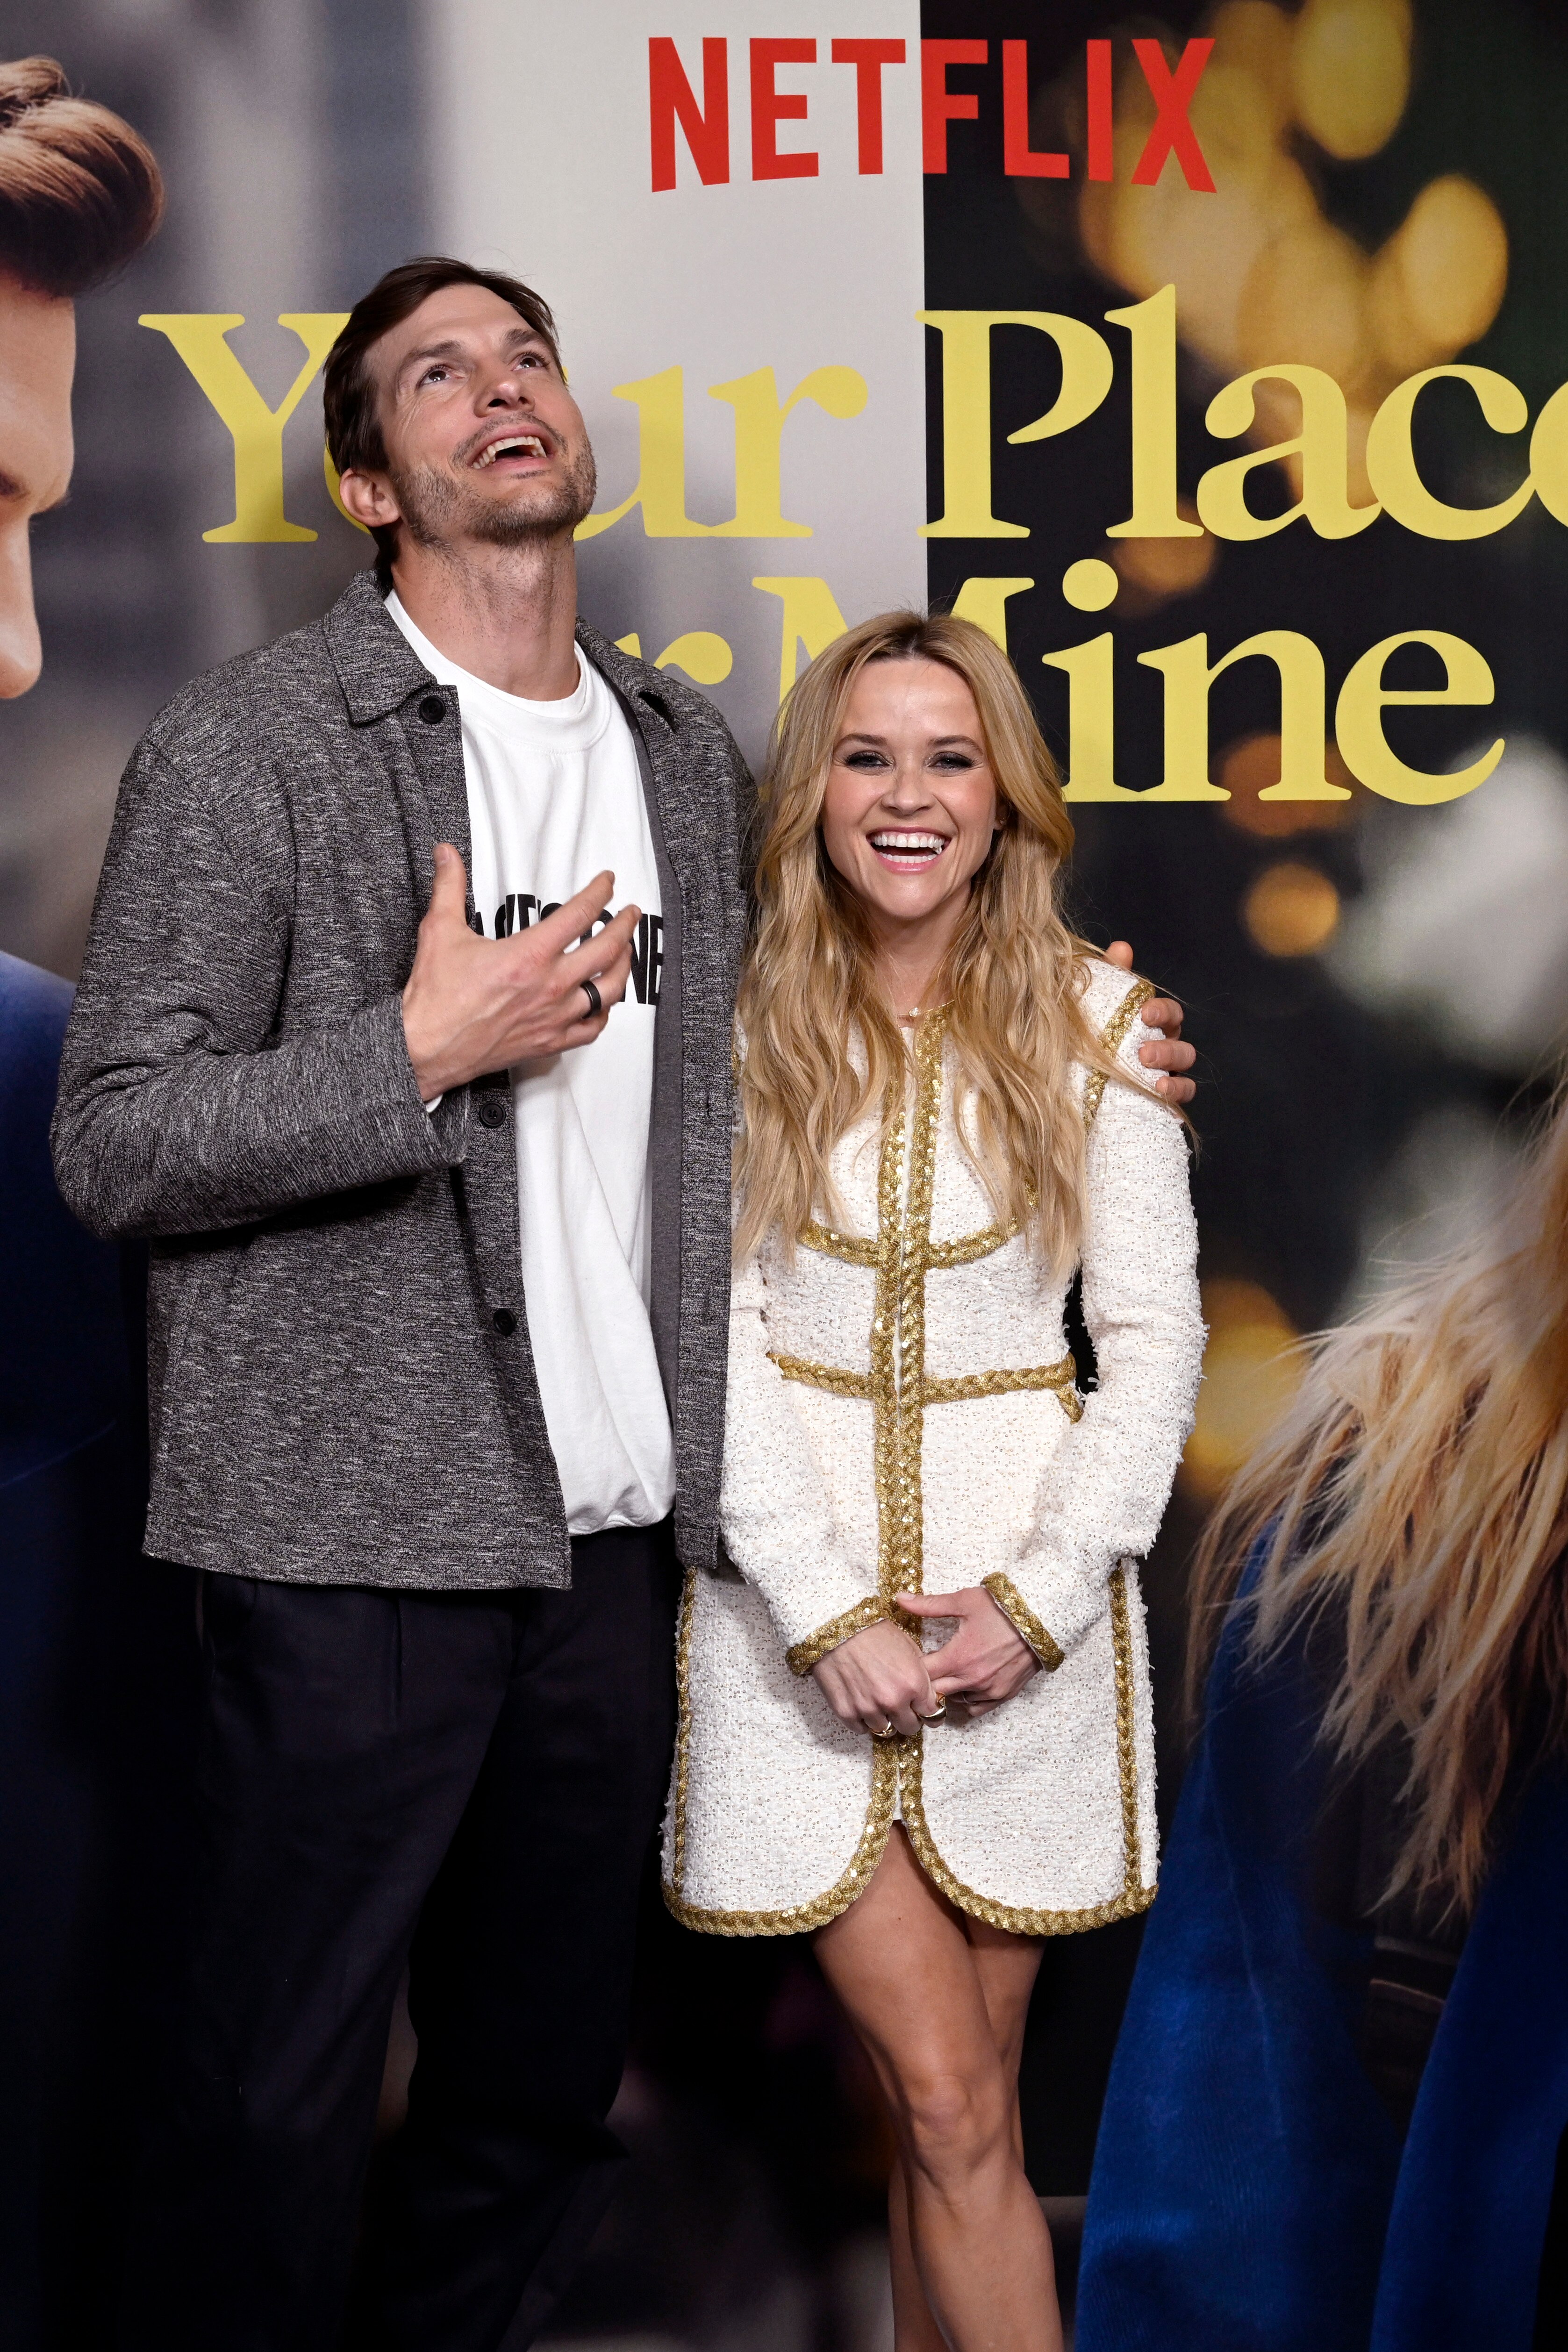 Ashton Kutcher and Reese Witherspoon. Photo credit: Netflix 'Your Place or Mine'